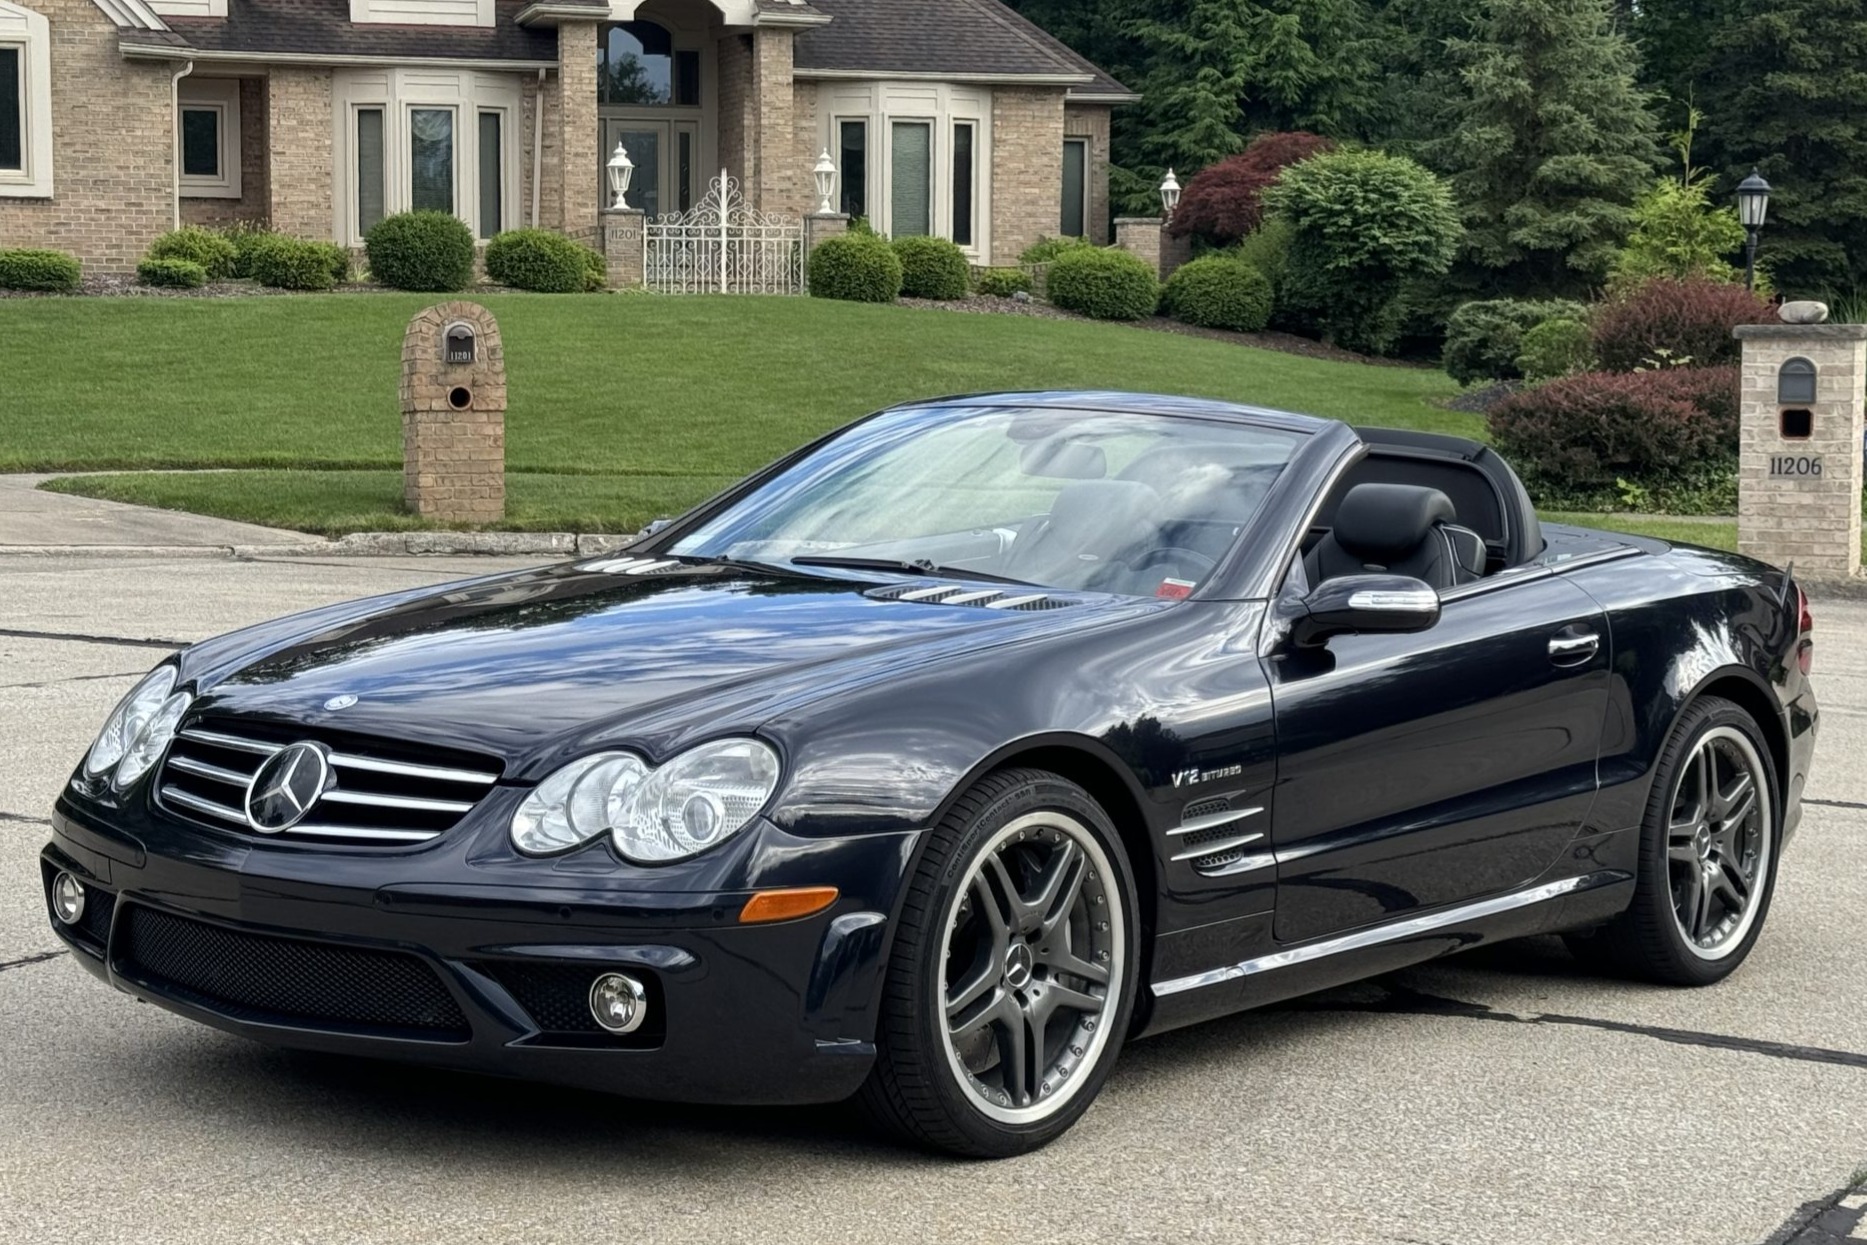 Used 2008 Mercedes-Benz SL65 AMG Review